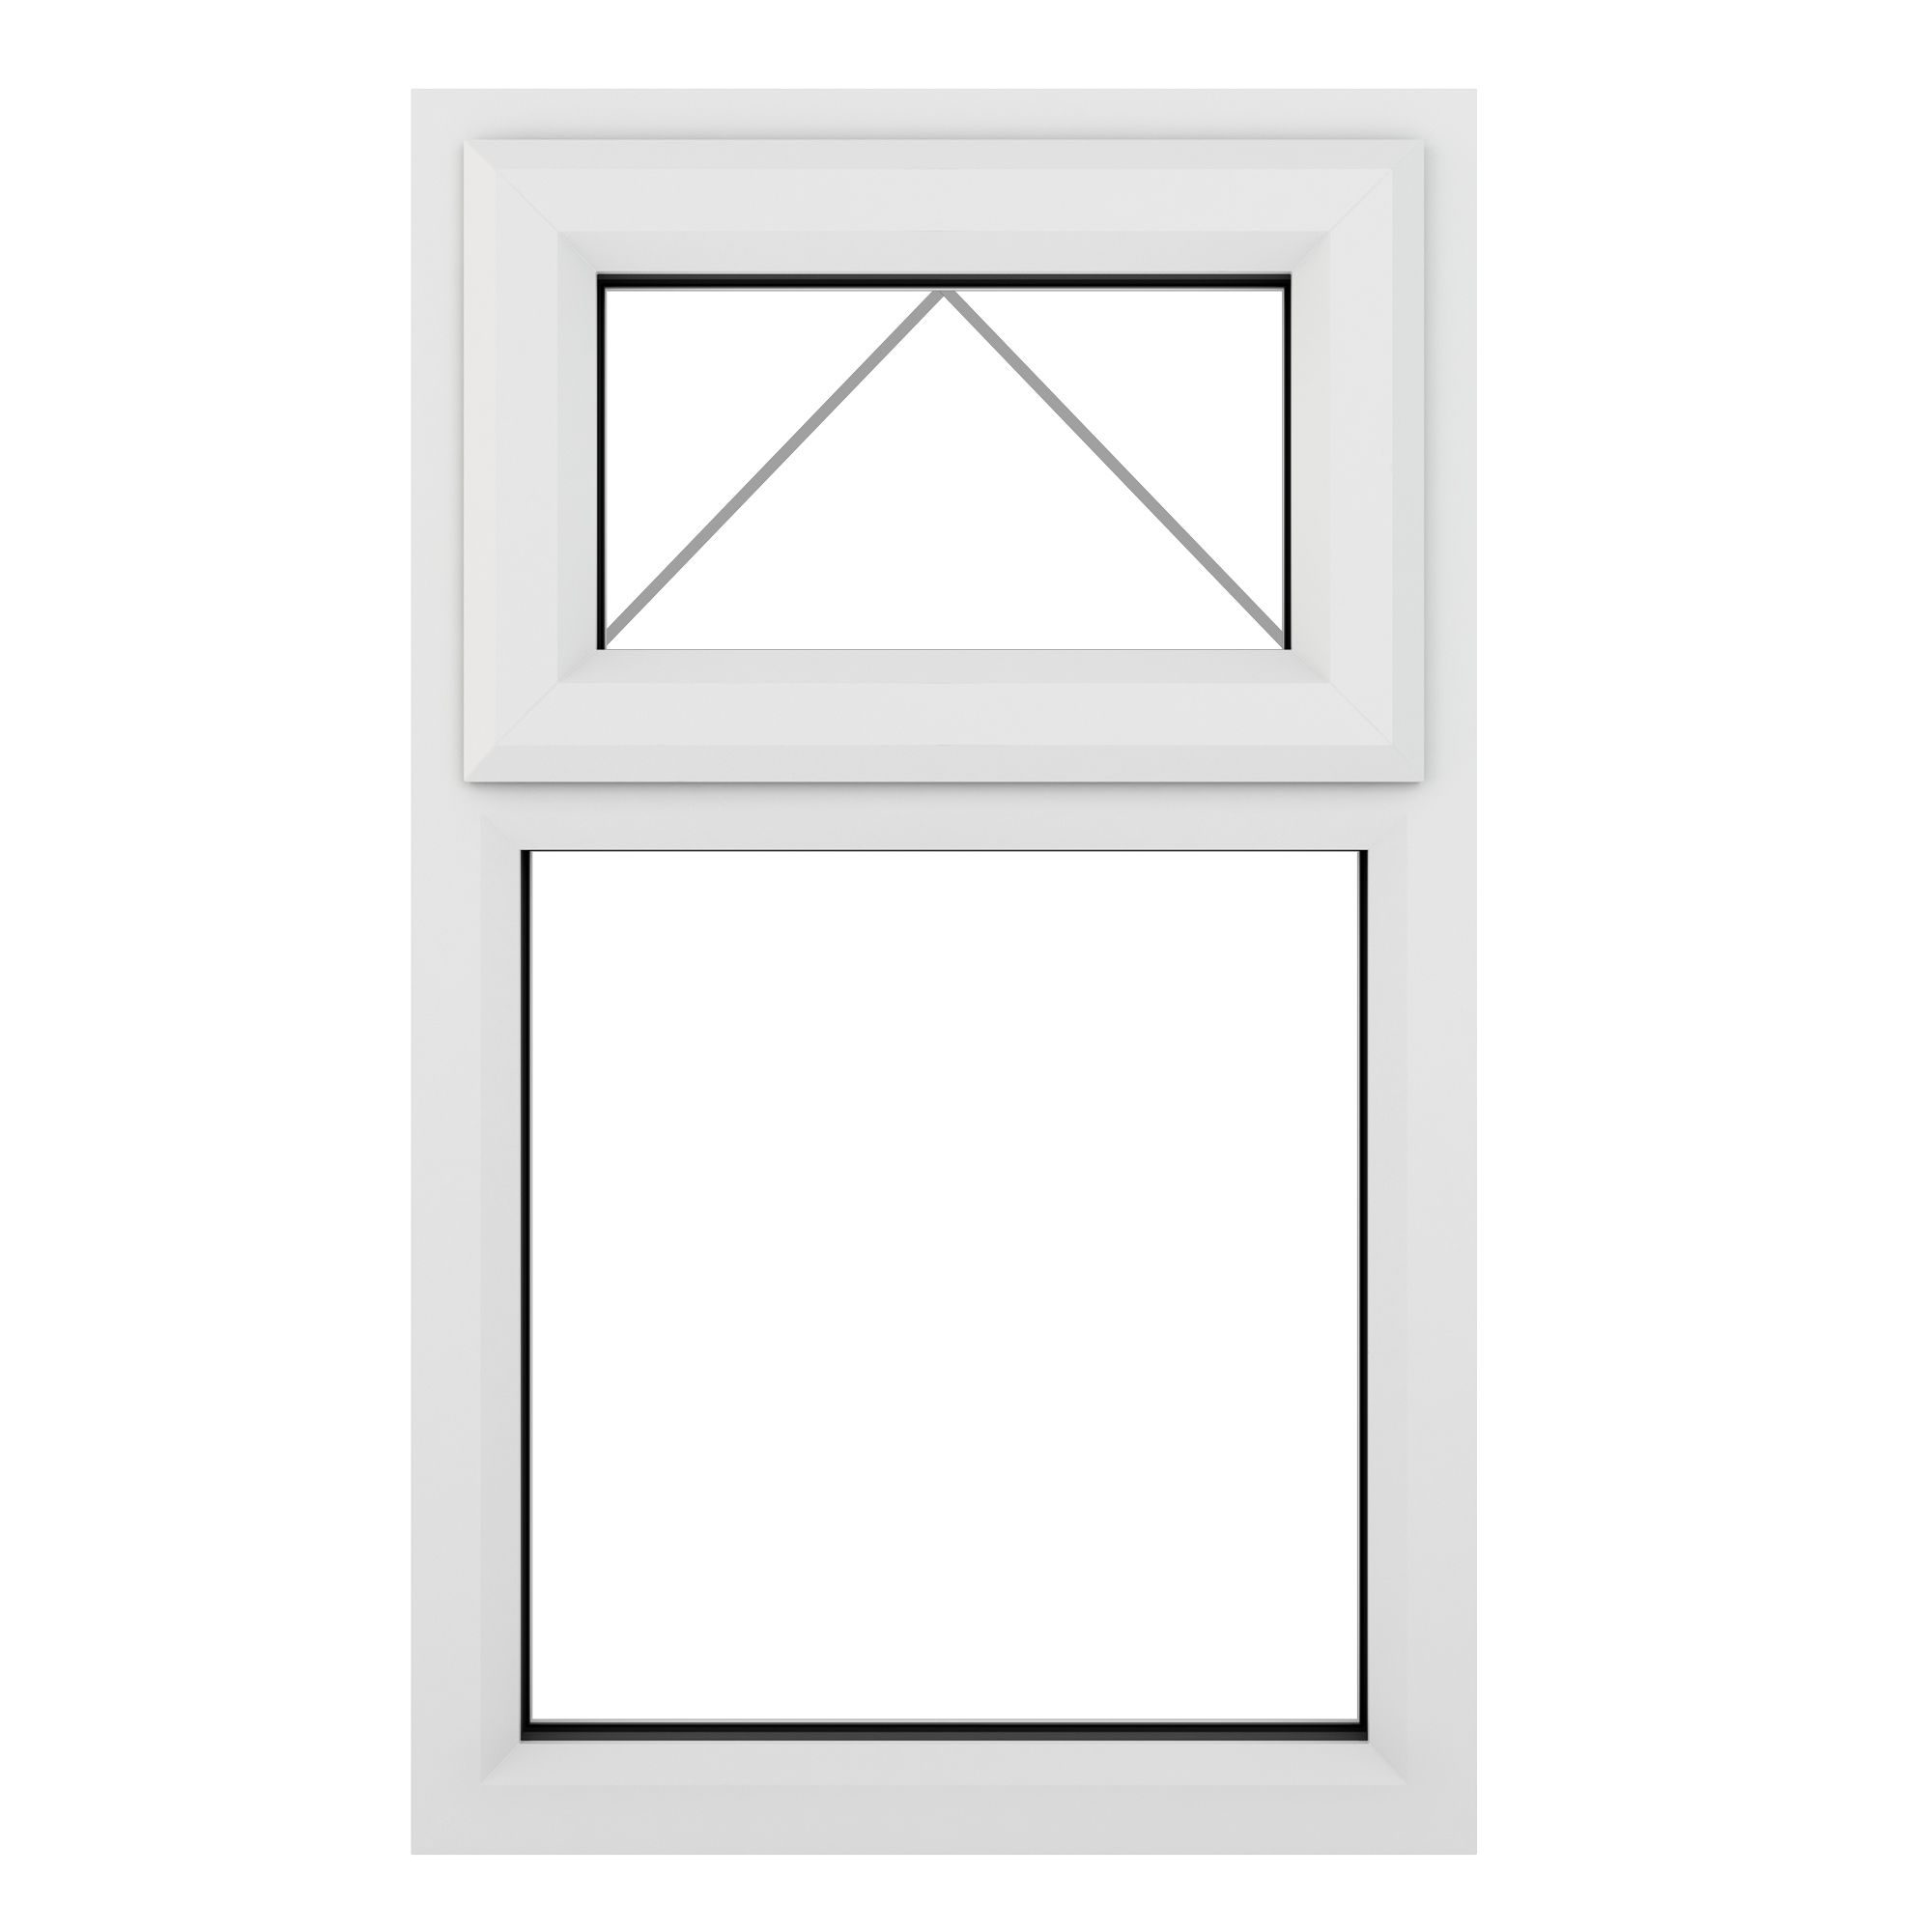 Fortia 2P Clear Glazed White uPVC Top hung Window, (H)1115mm (W)610mm